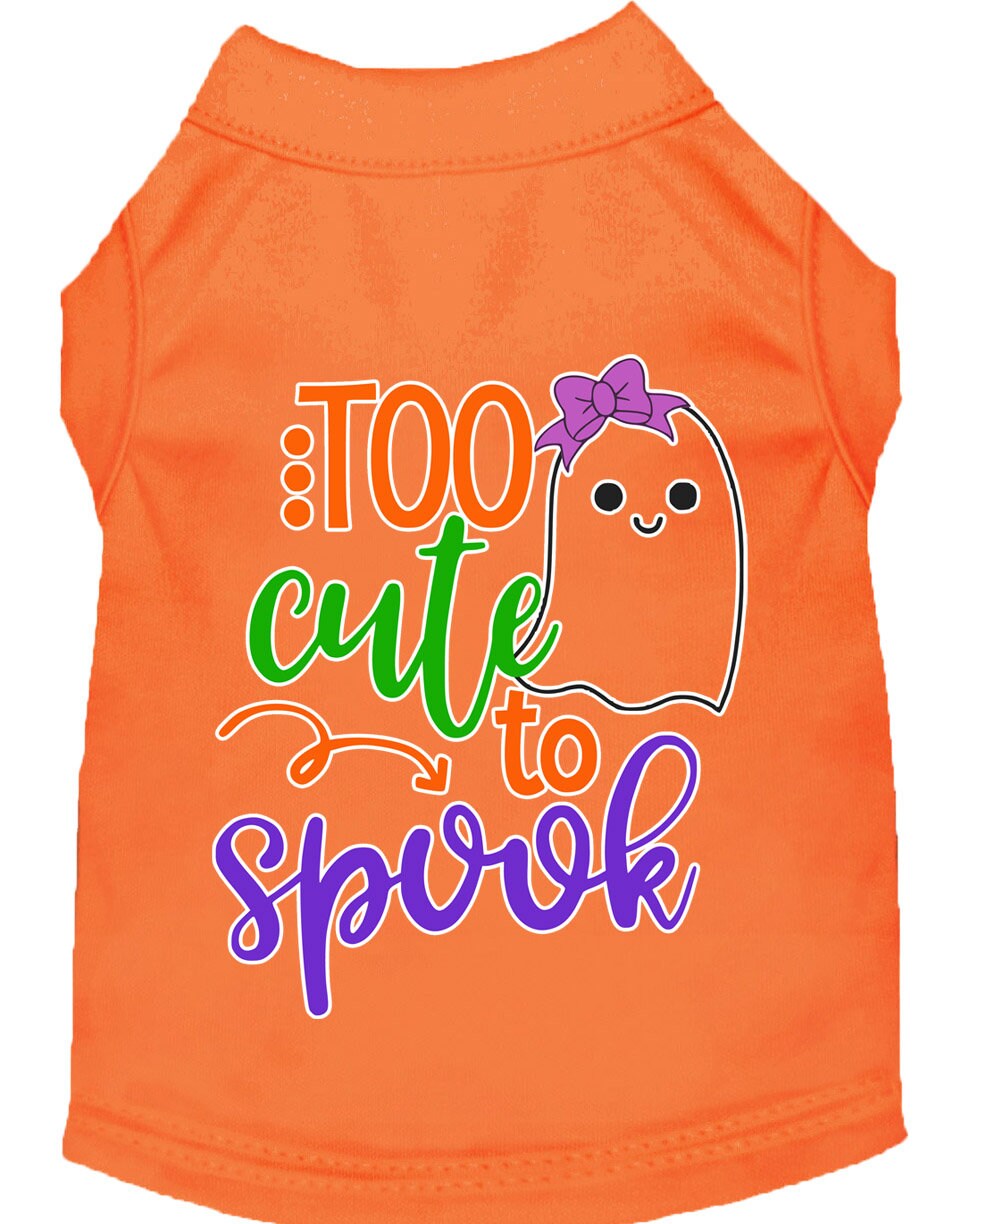 Halloween Pet Dog & Cat Shirt Screen Printed, "Too Cute To Spook - Girly Ghost"